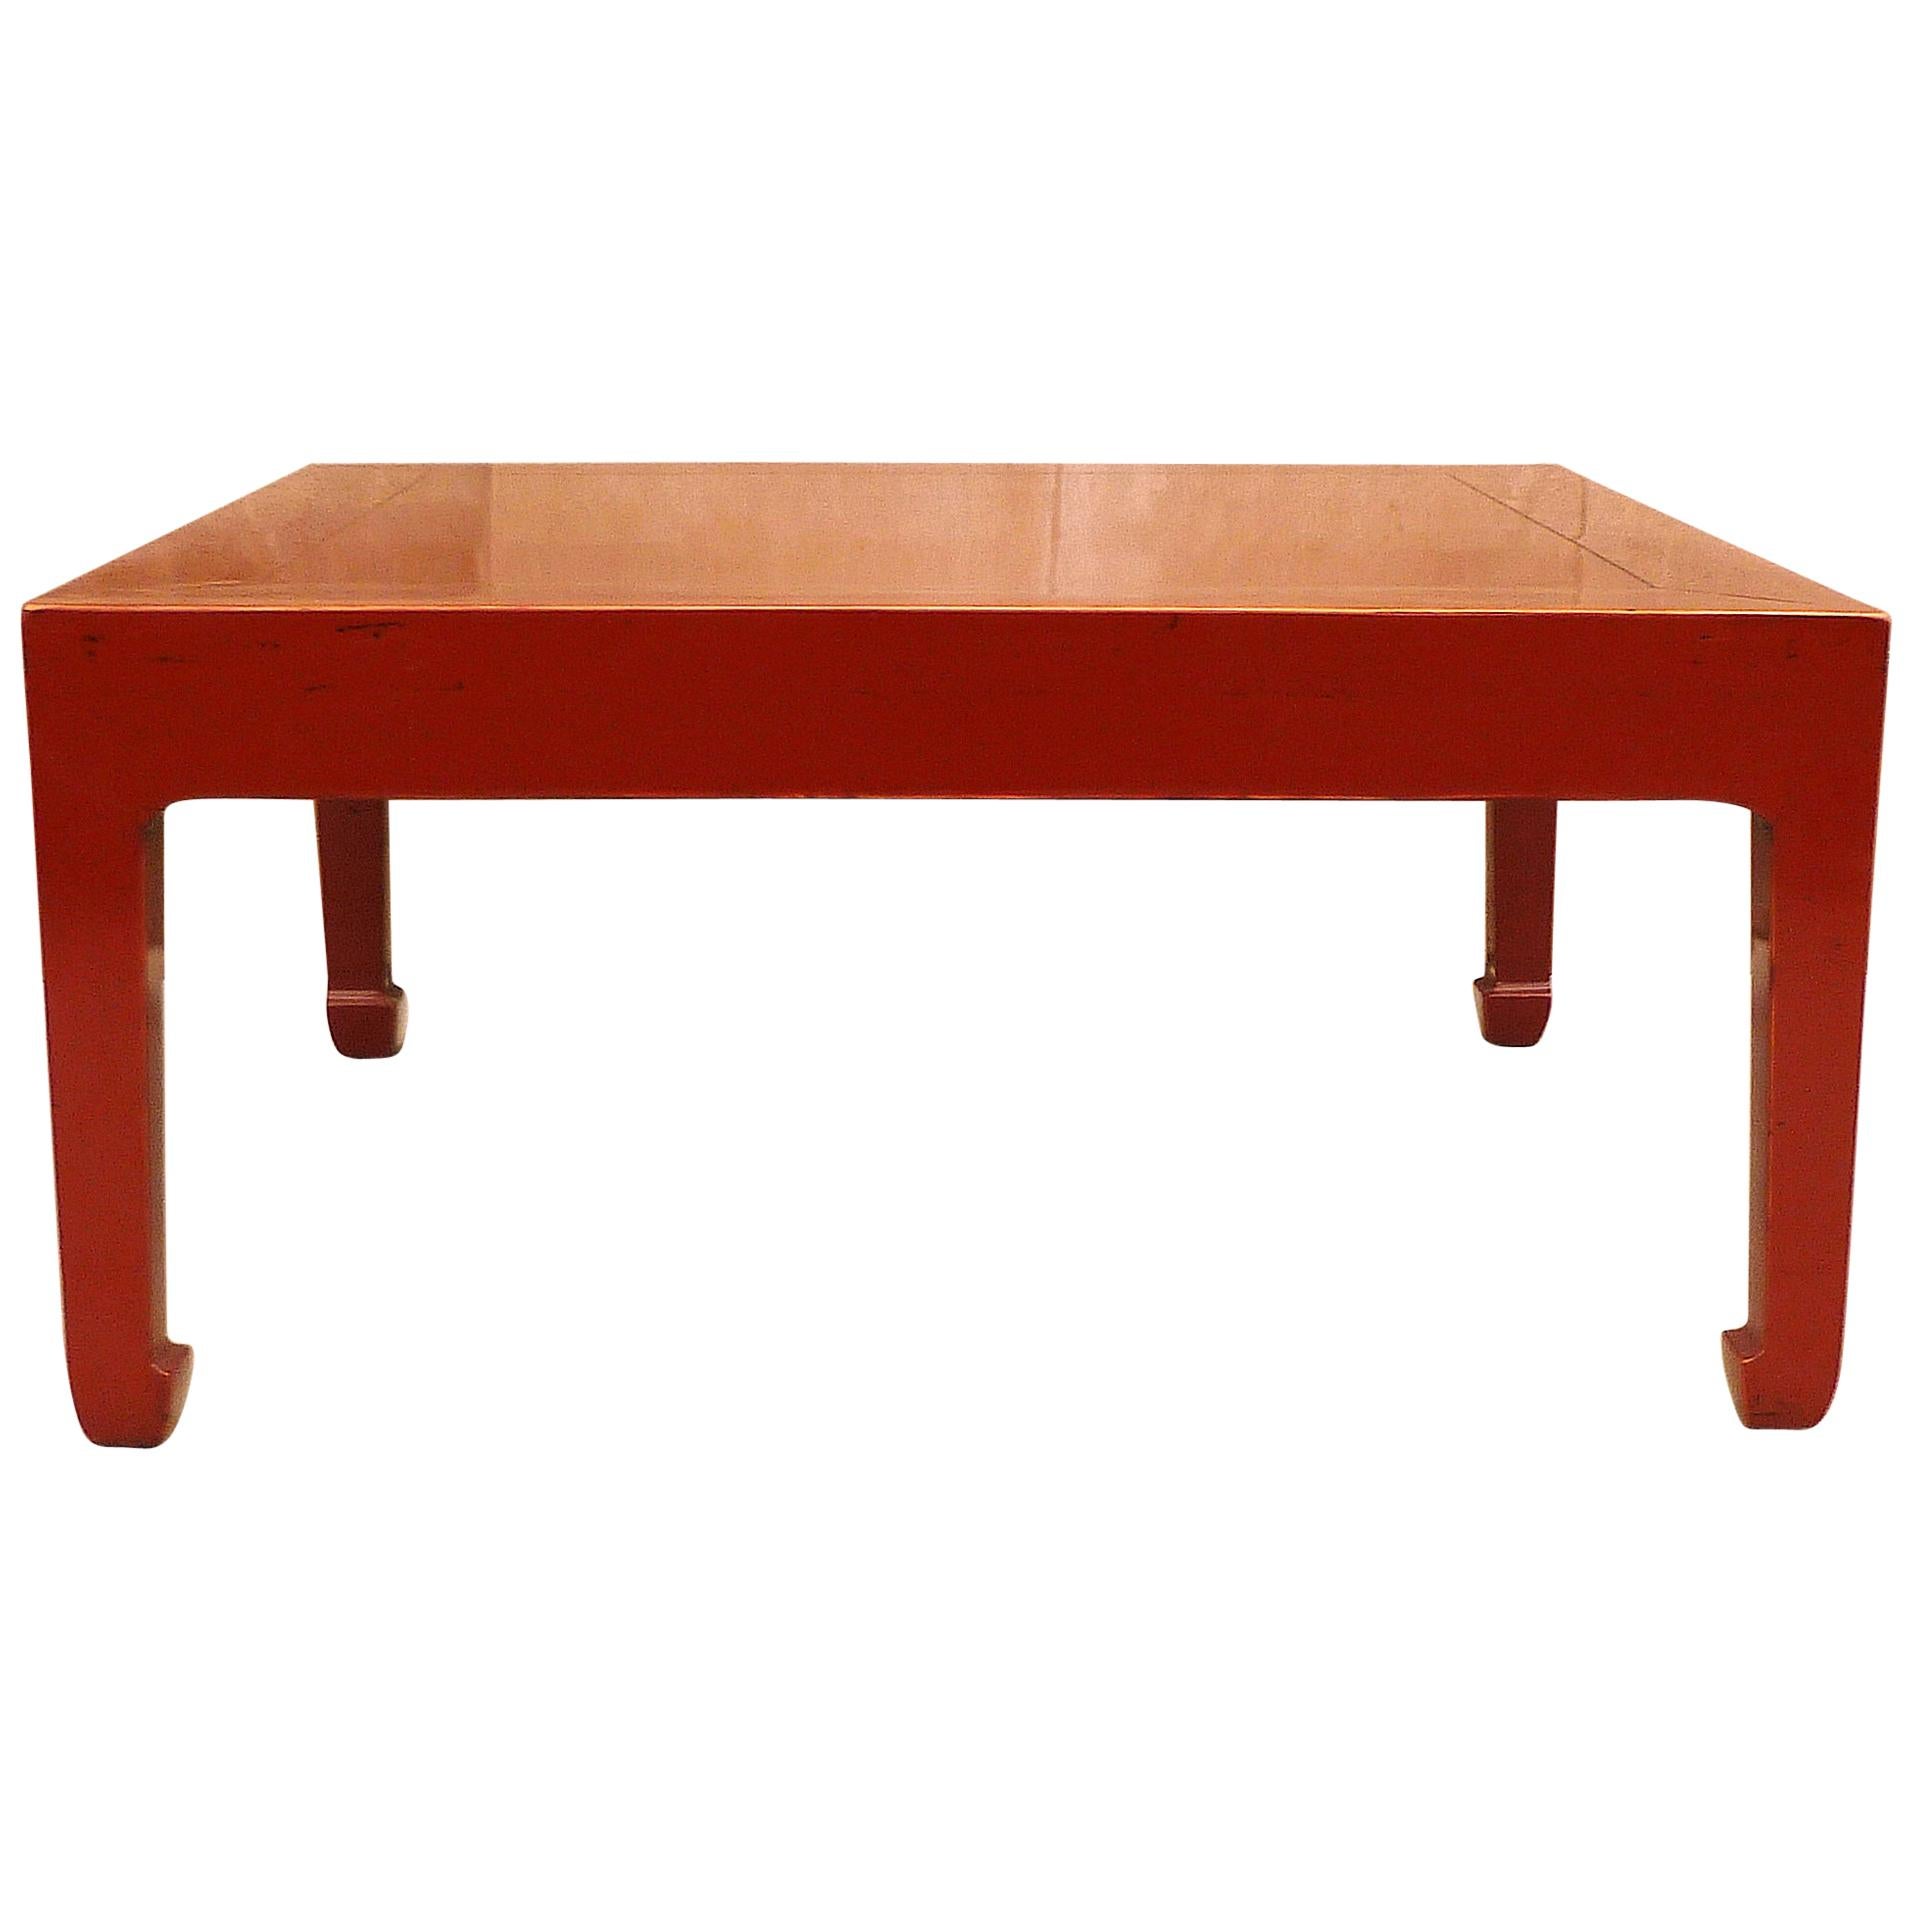 Fine Square Red Lacquer Low Table